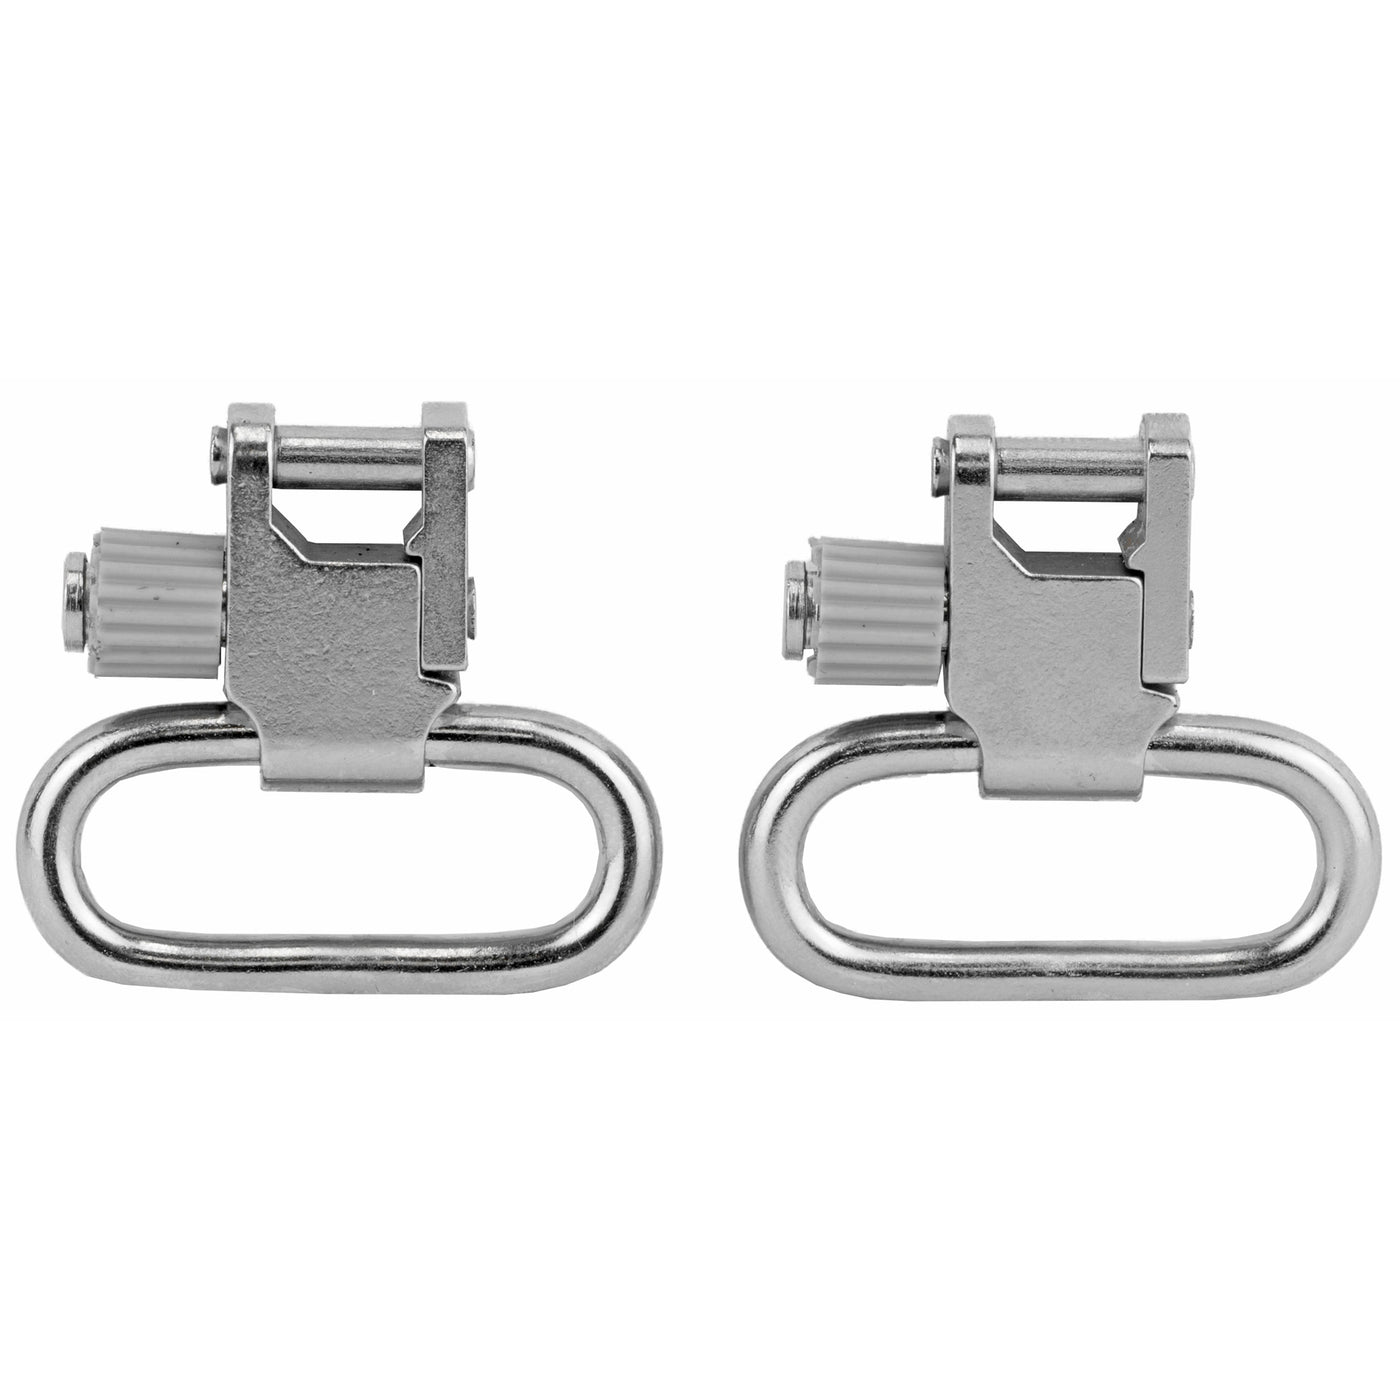 Michaels Super Swivels Only - 1" Silver 2-pack